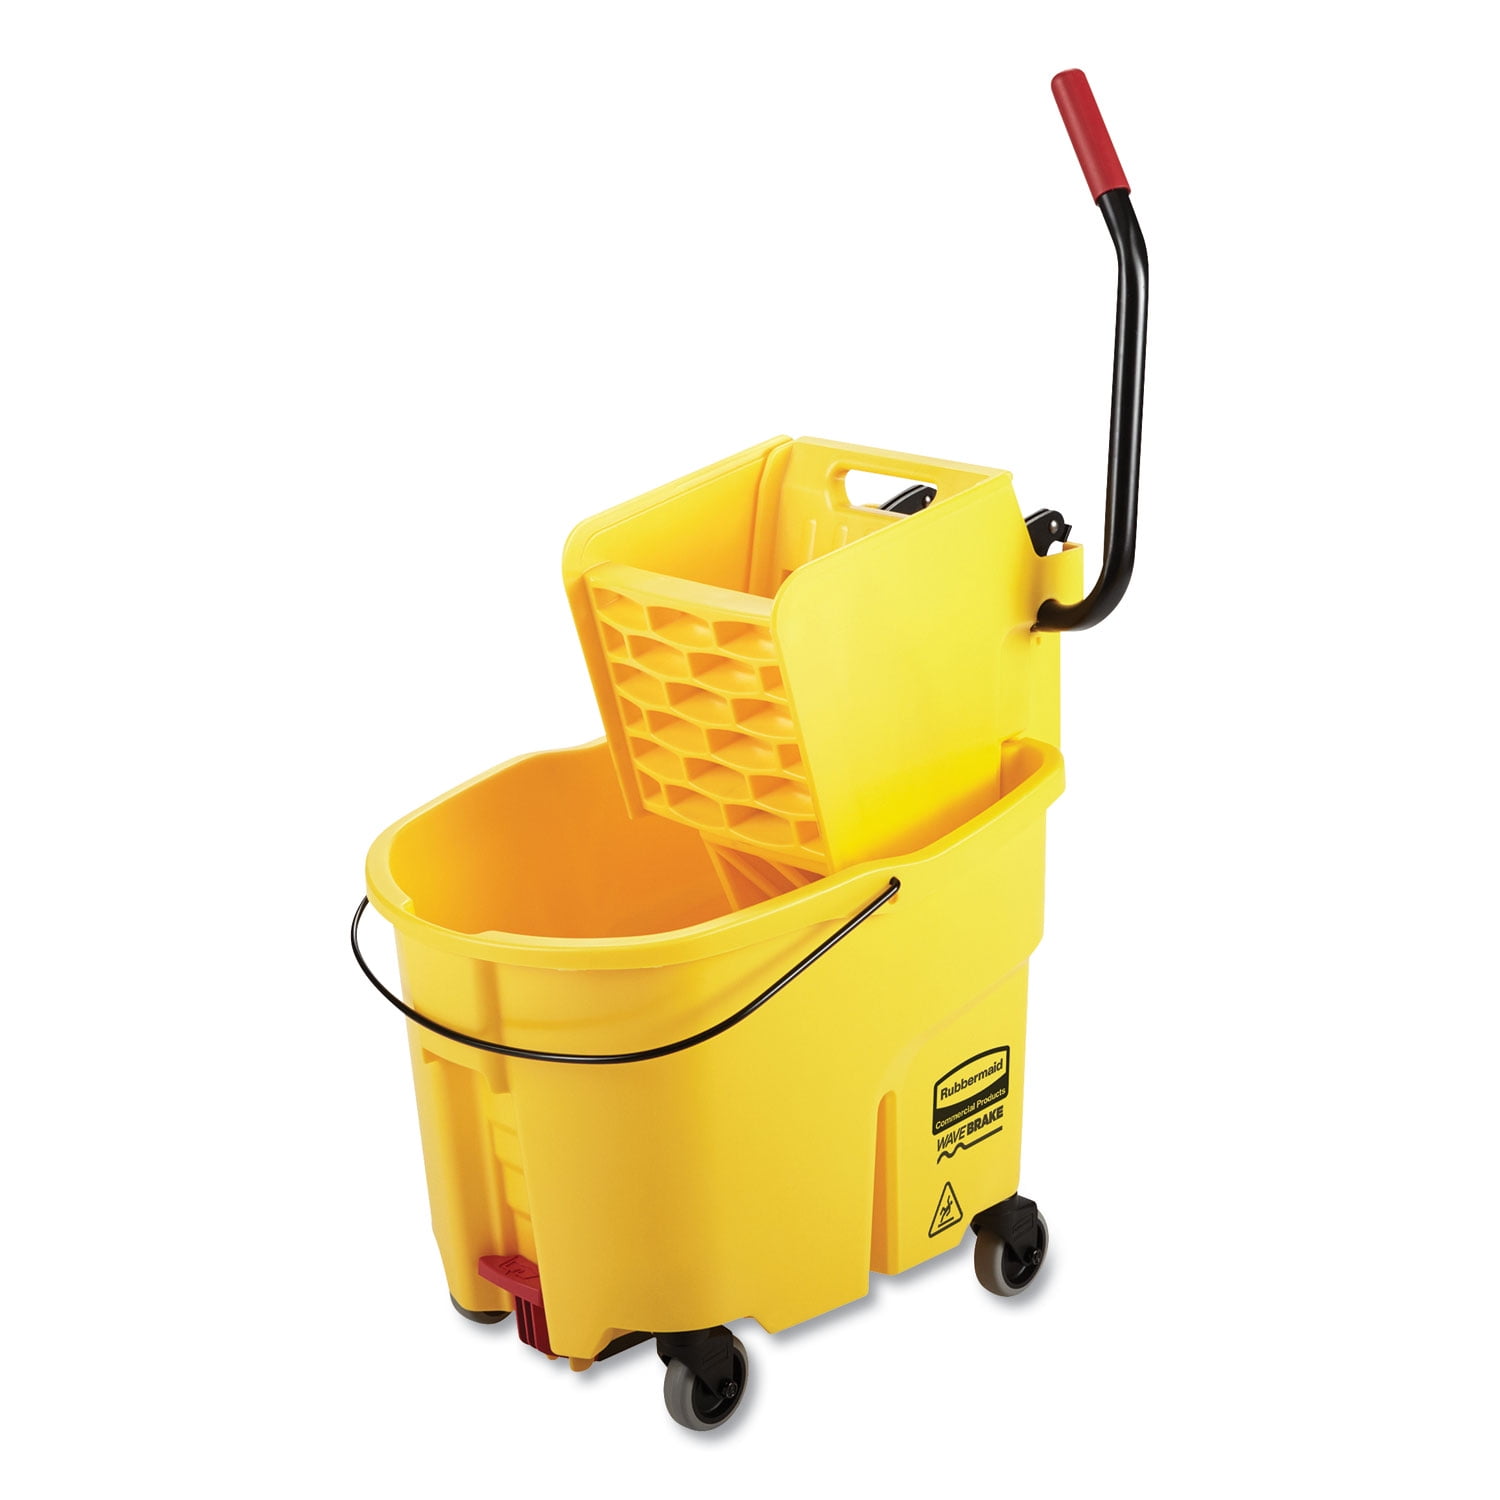 Commercial Mop Buckets: Safe Material and Why You Need One